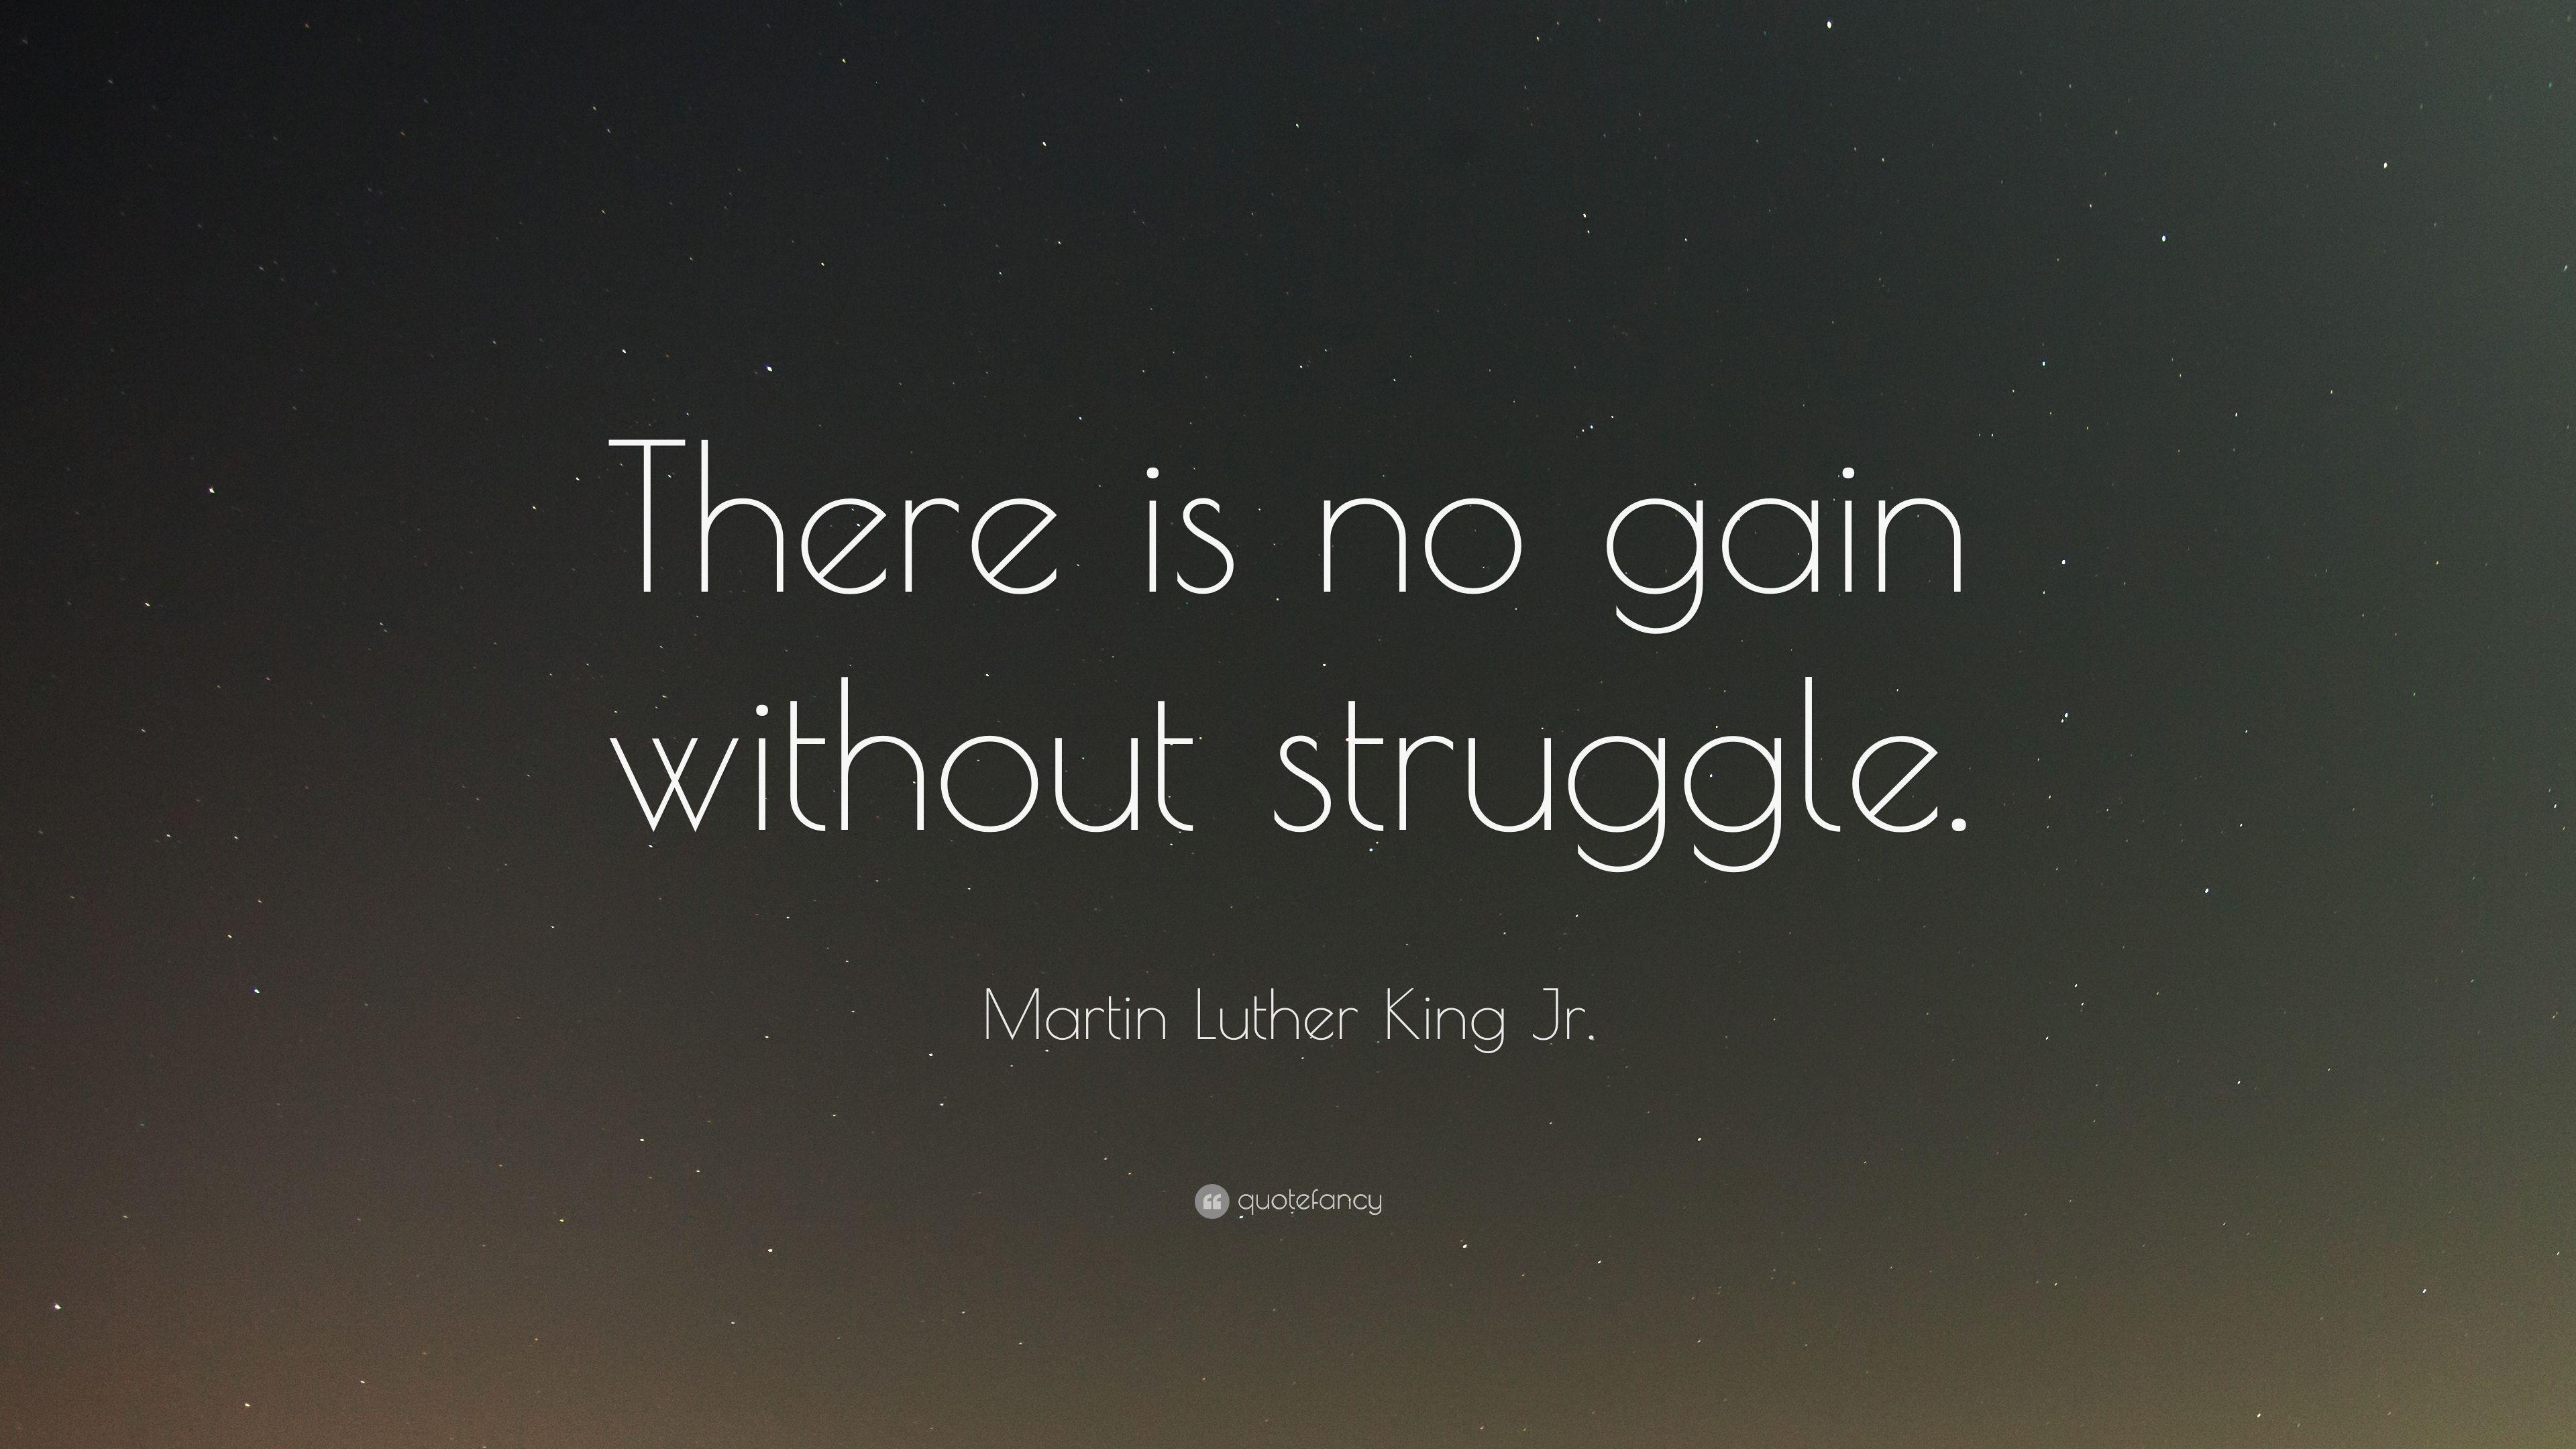 Martin Luther King Jr. Quote: “There is no gain without struggle